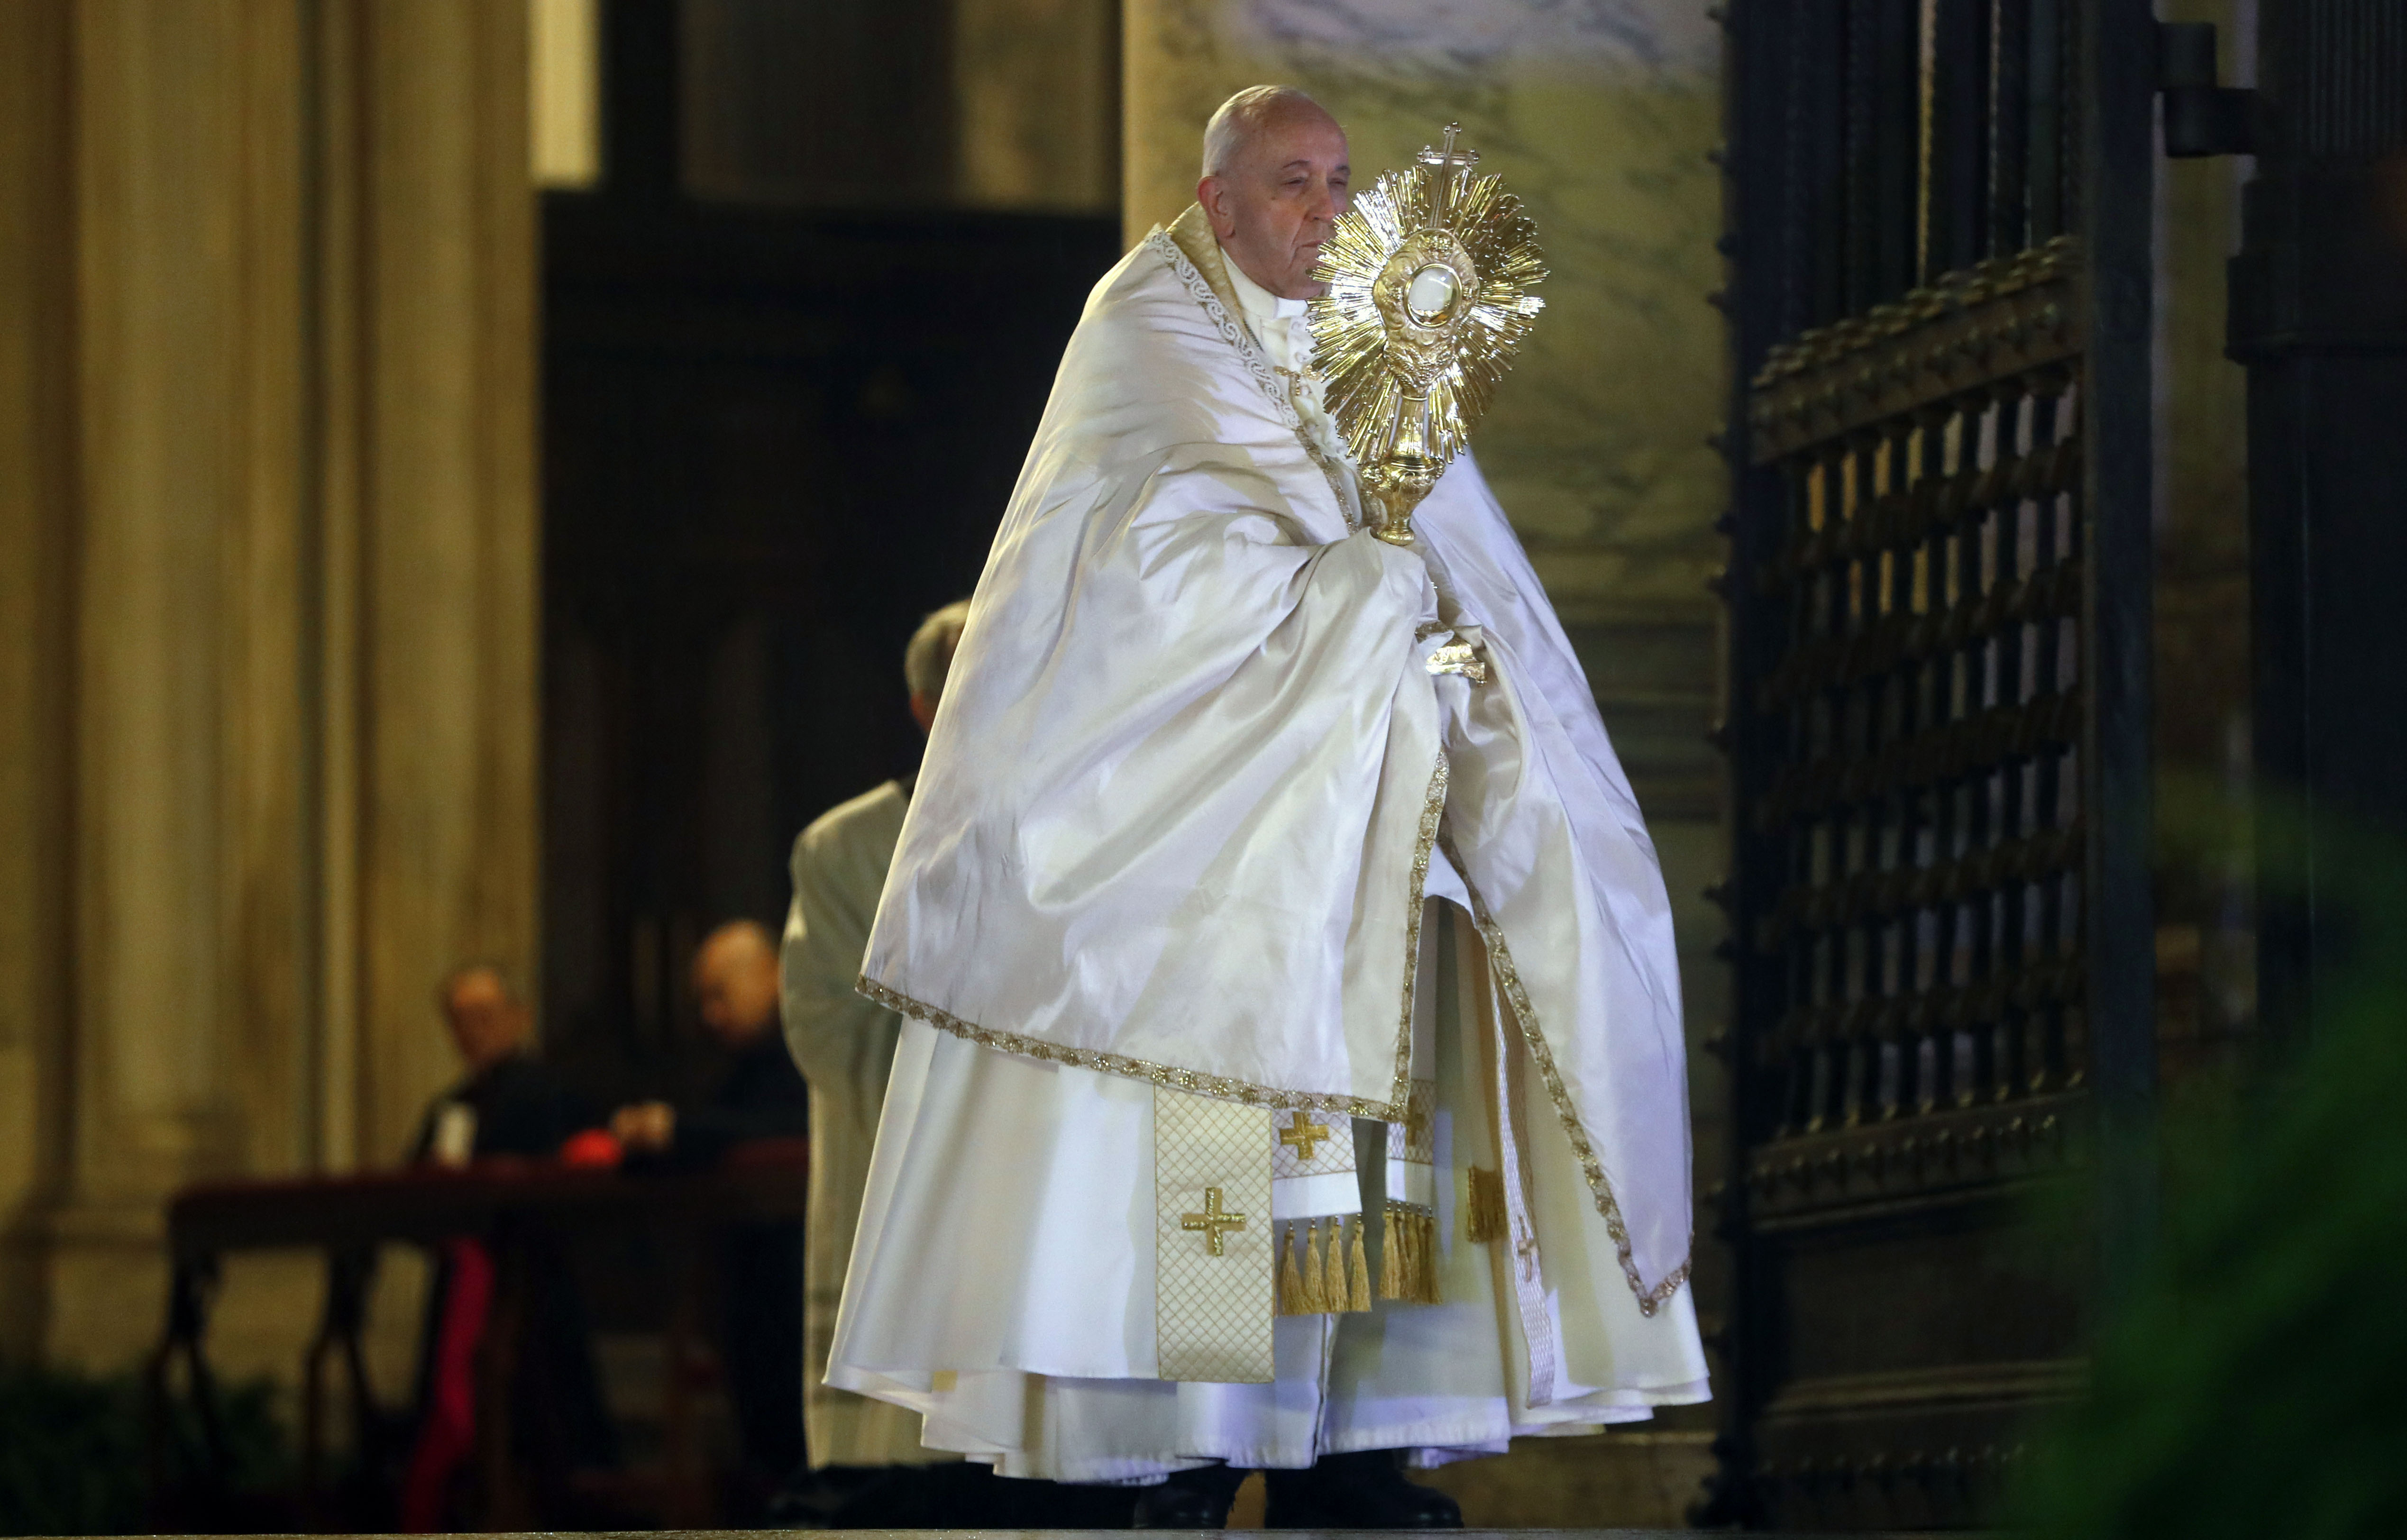 Here Are Some Photos From Pope Francis’ Urbi Et Orbi Blessing Amid